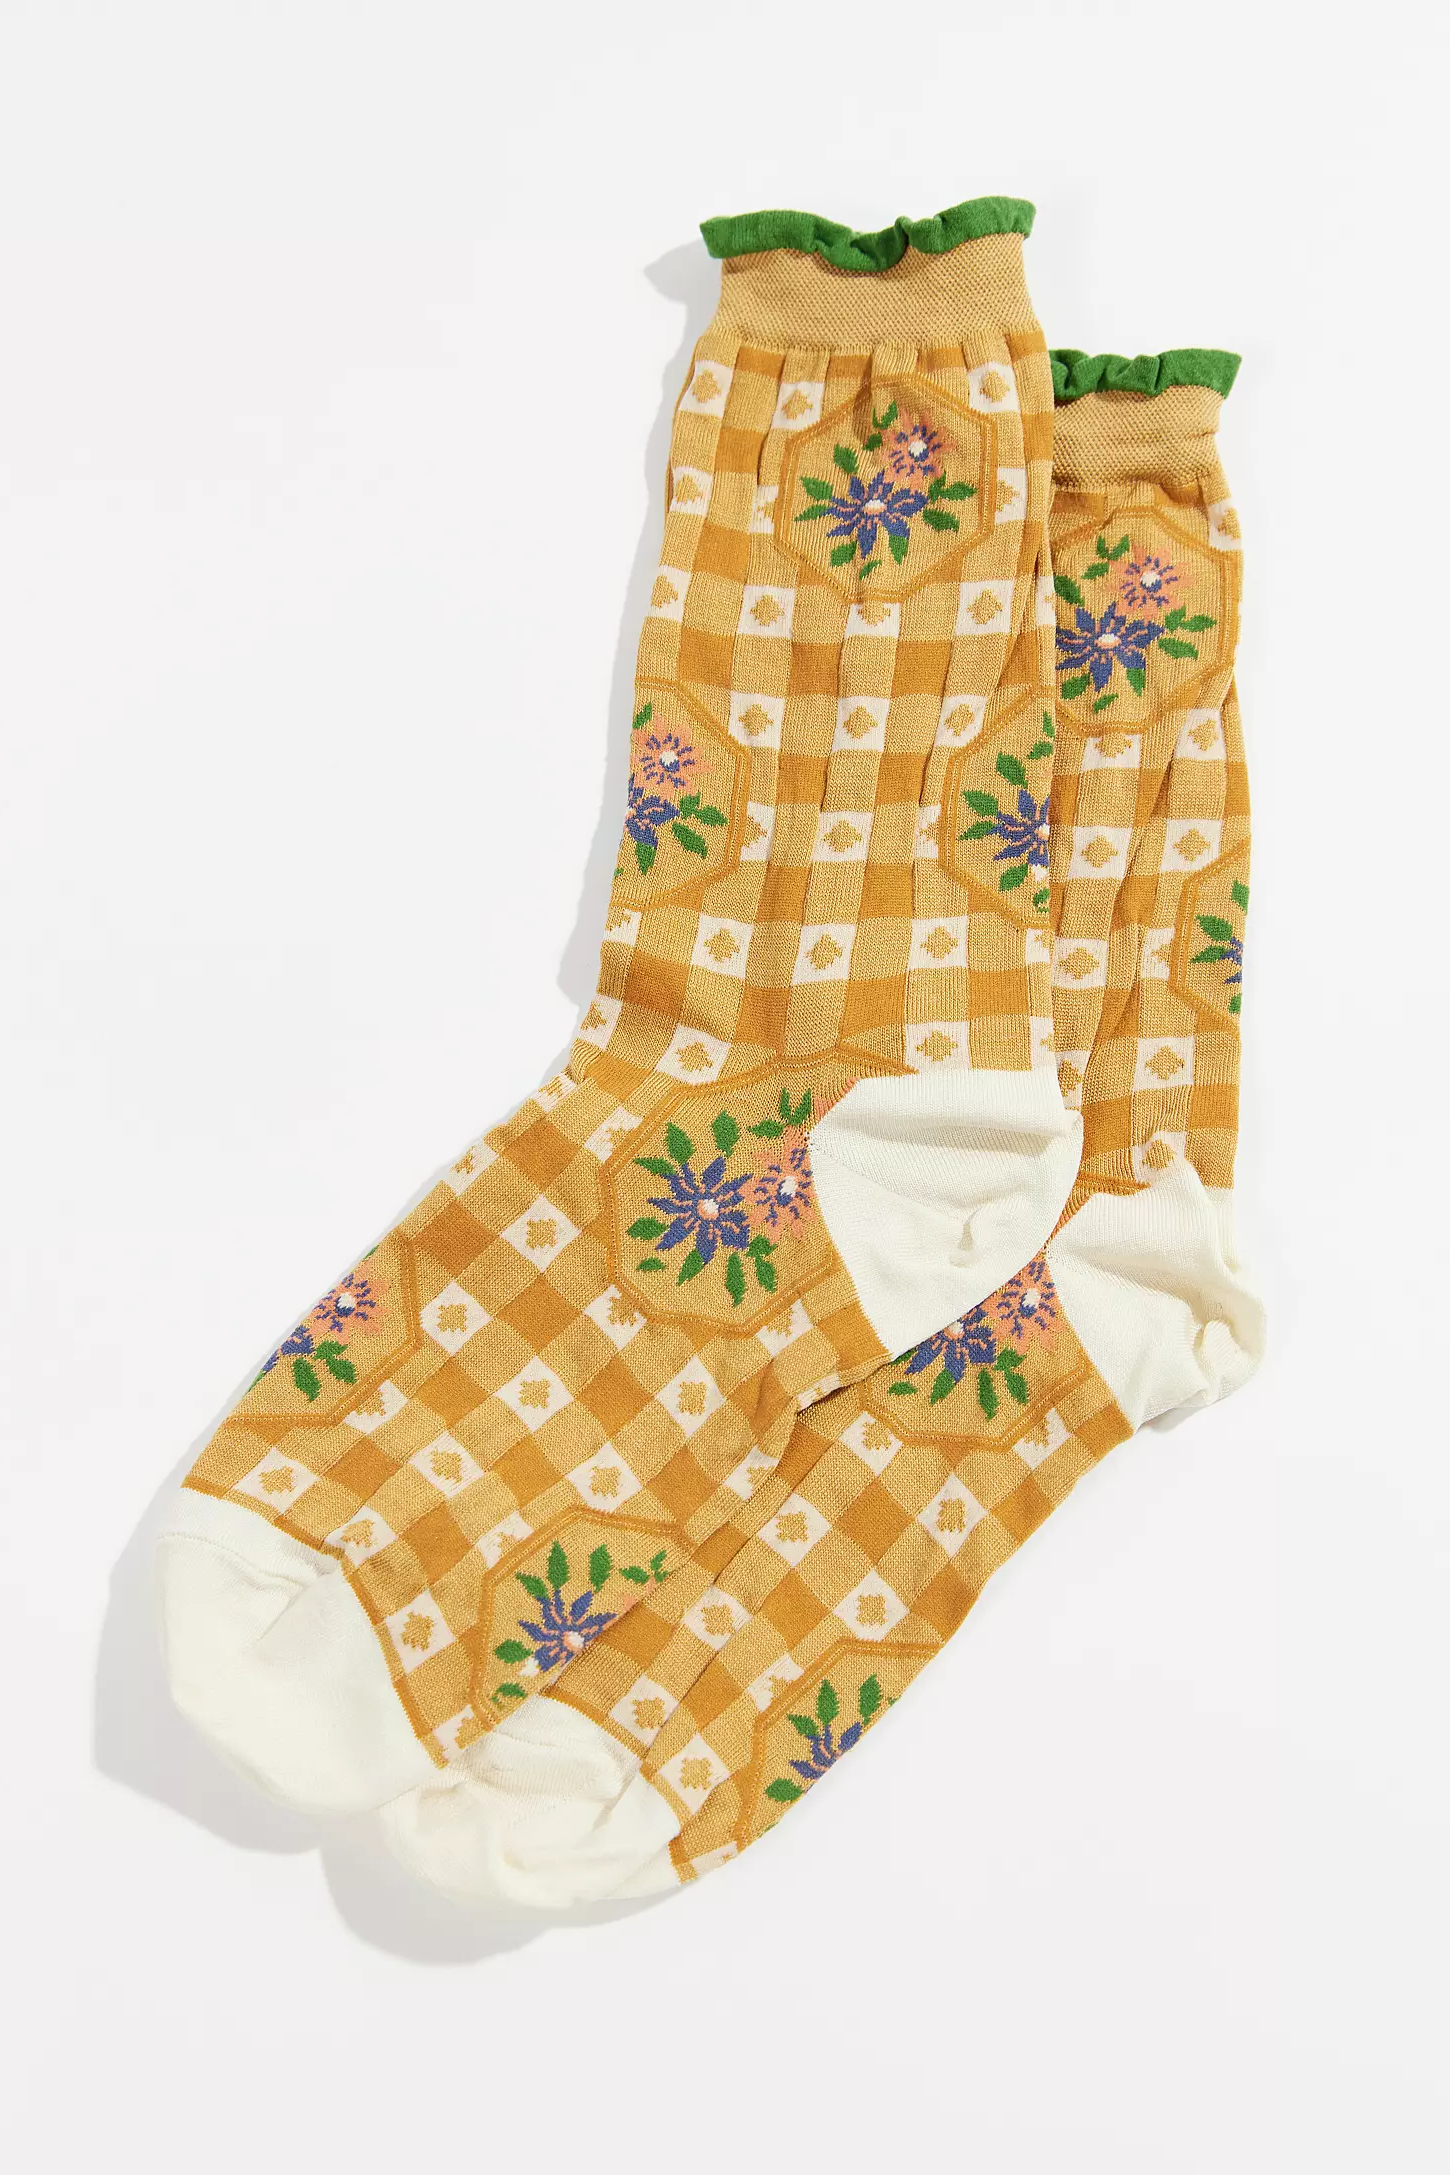 pair of socks with yellow and white plaid, white toes and a green ankle trim. 